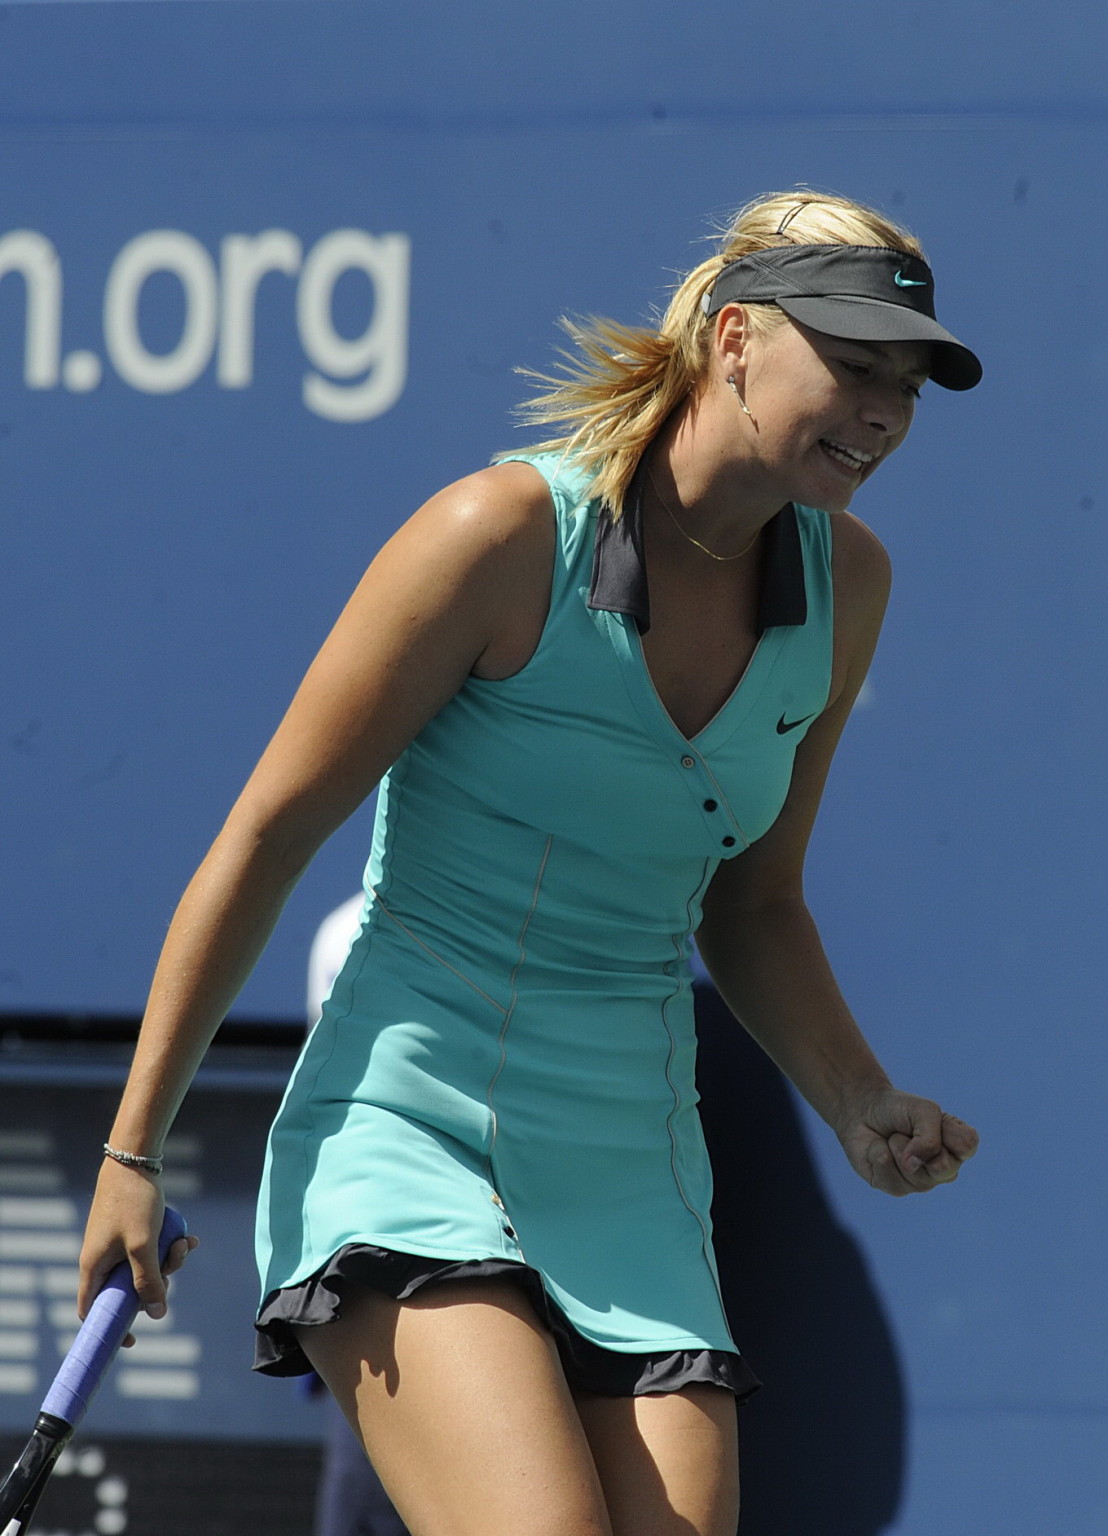 Maria Sharapova flashing her panties at The US Open at Flushing Meadows in NYC #75334377